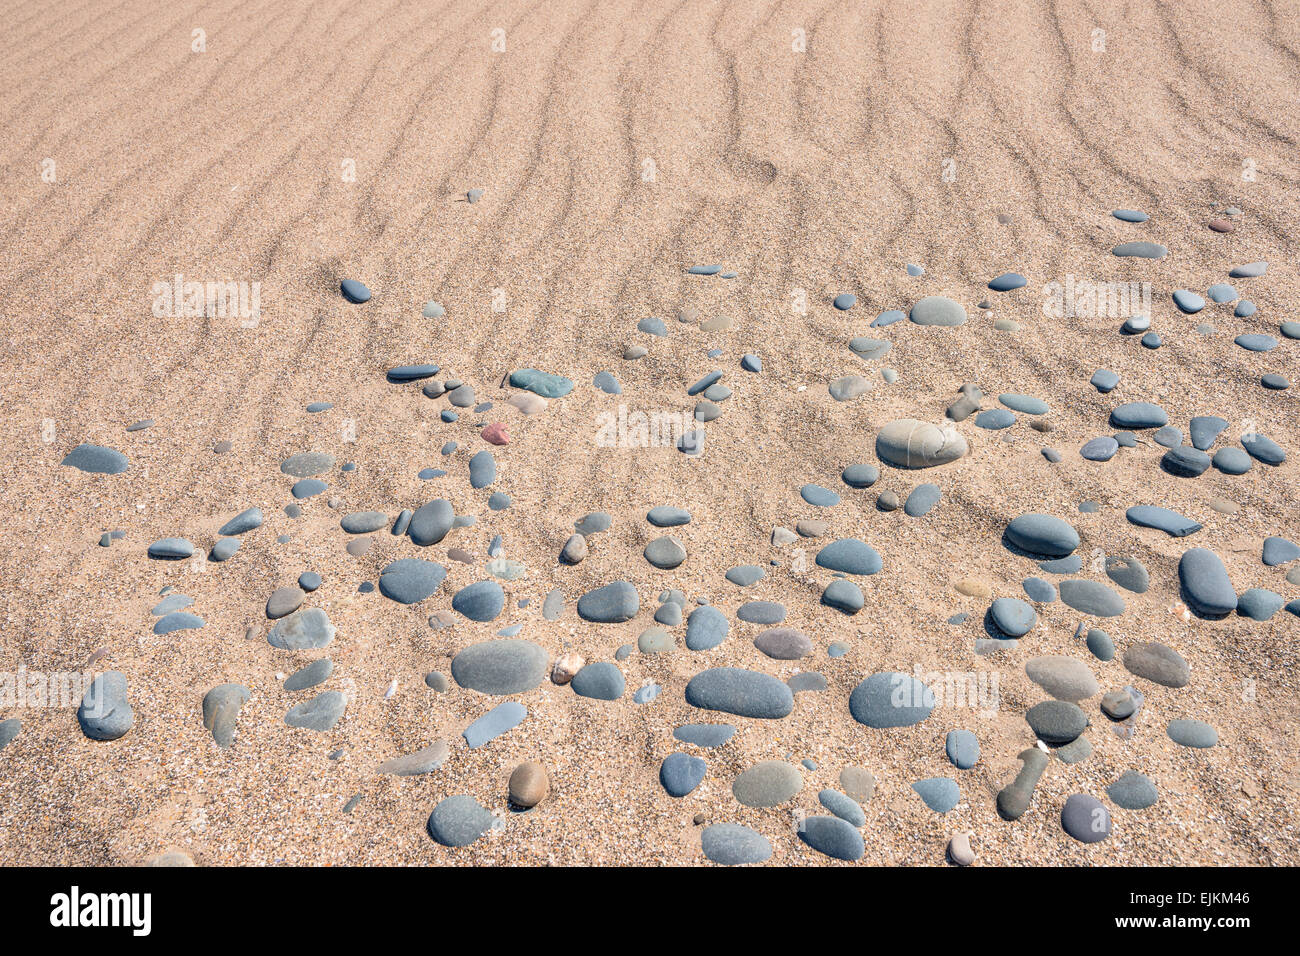 Sand and pebbles texture and background Stock Photo